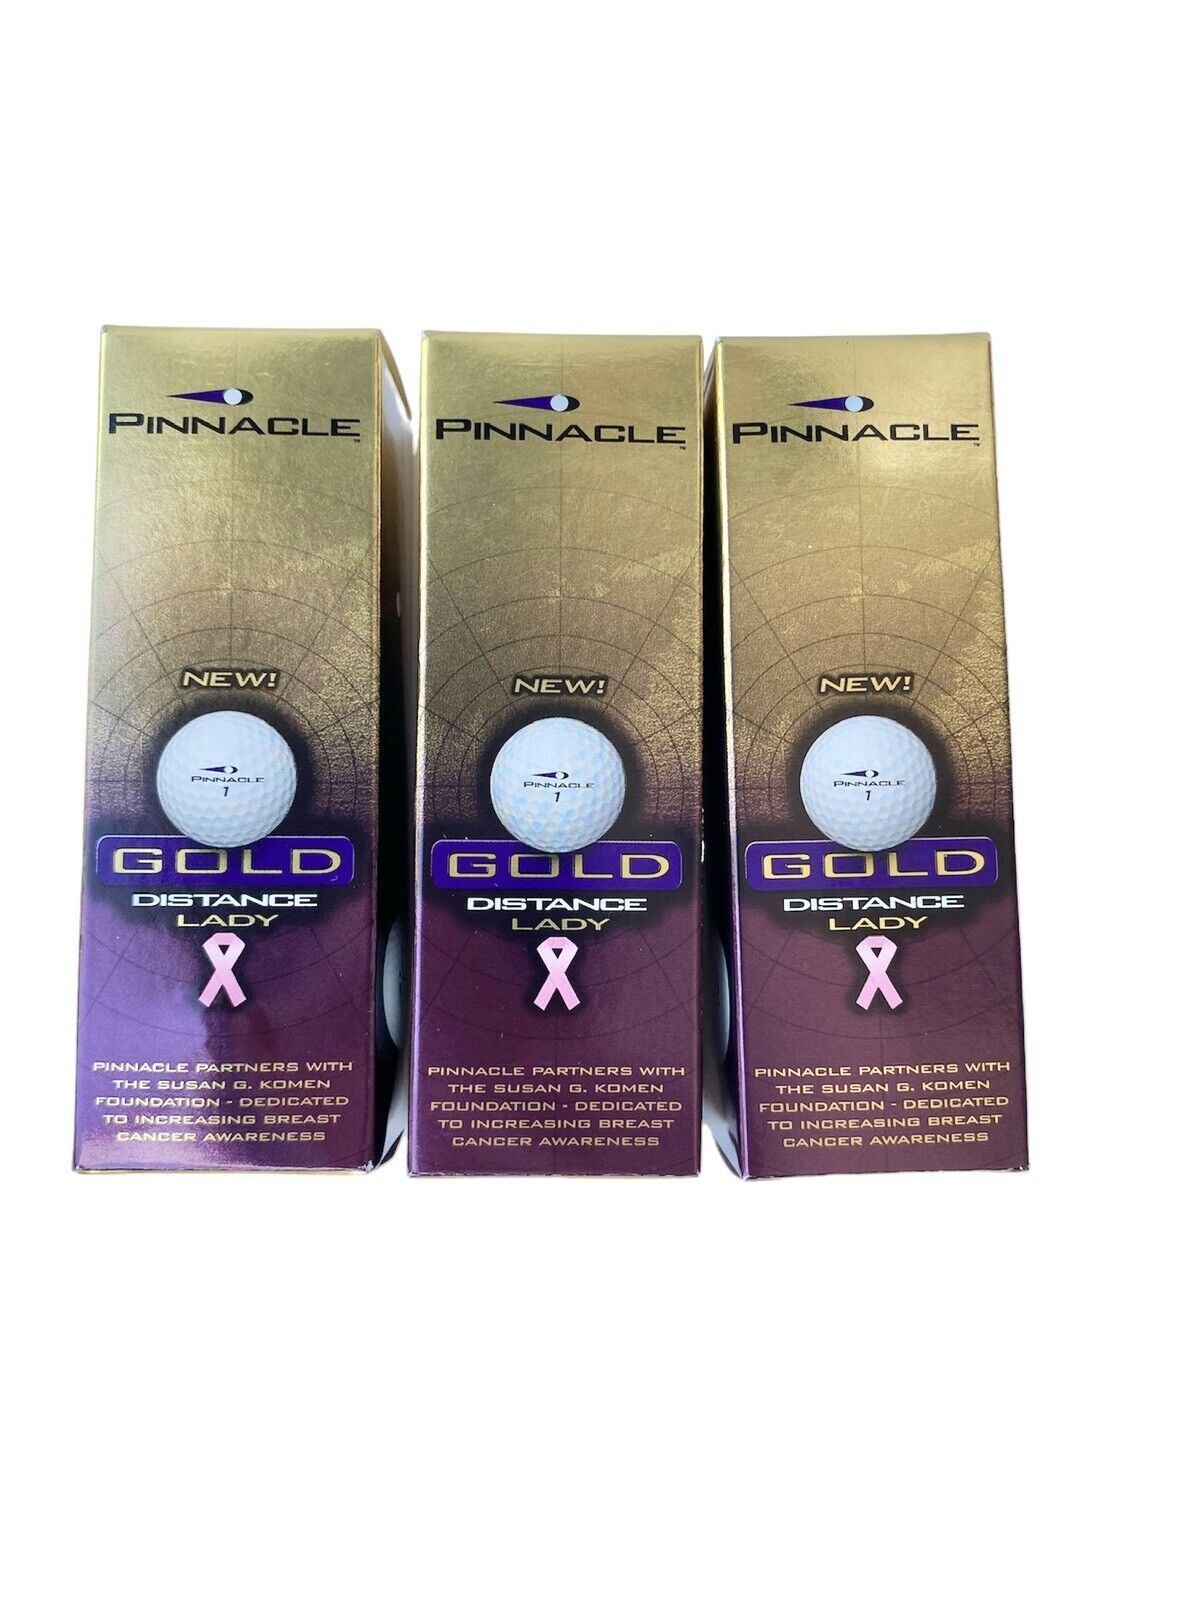 Pinnacle Gold Distance Lady, 3 sleeves 9 balls New Woman 